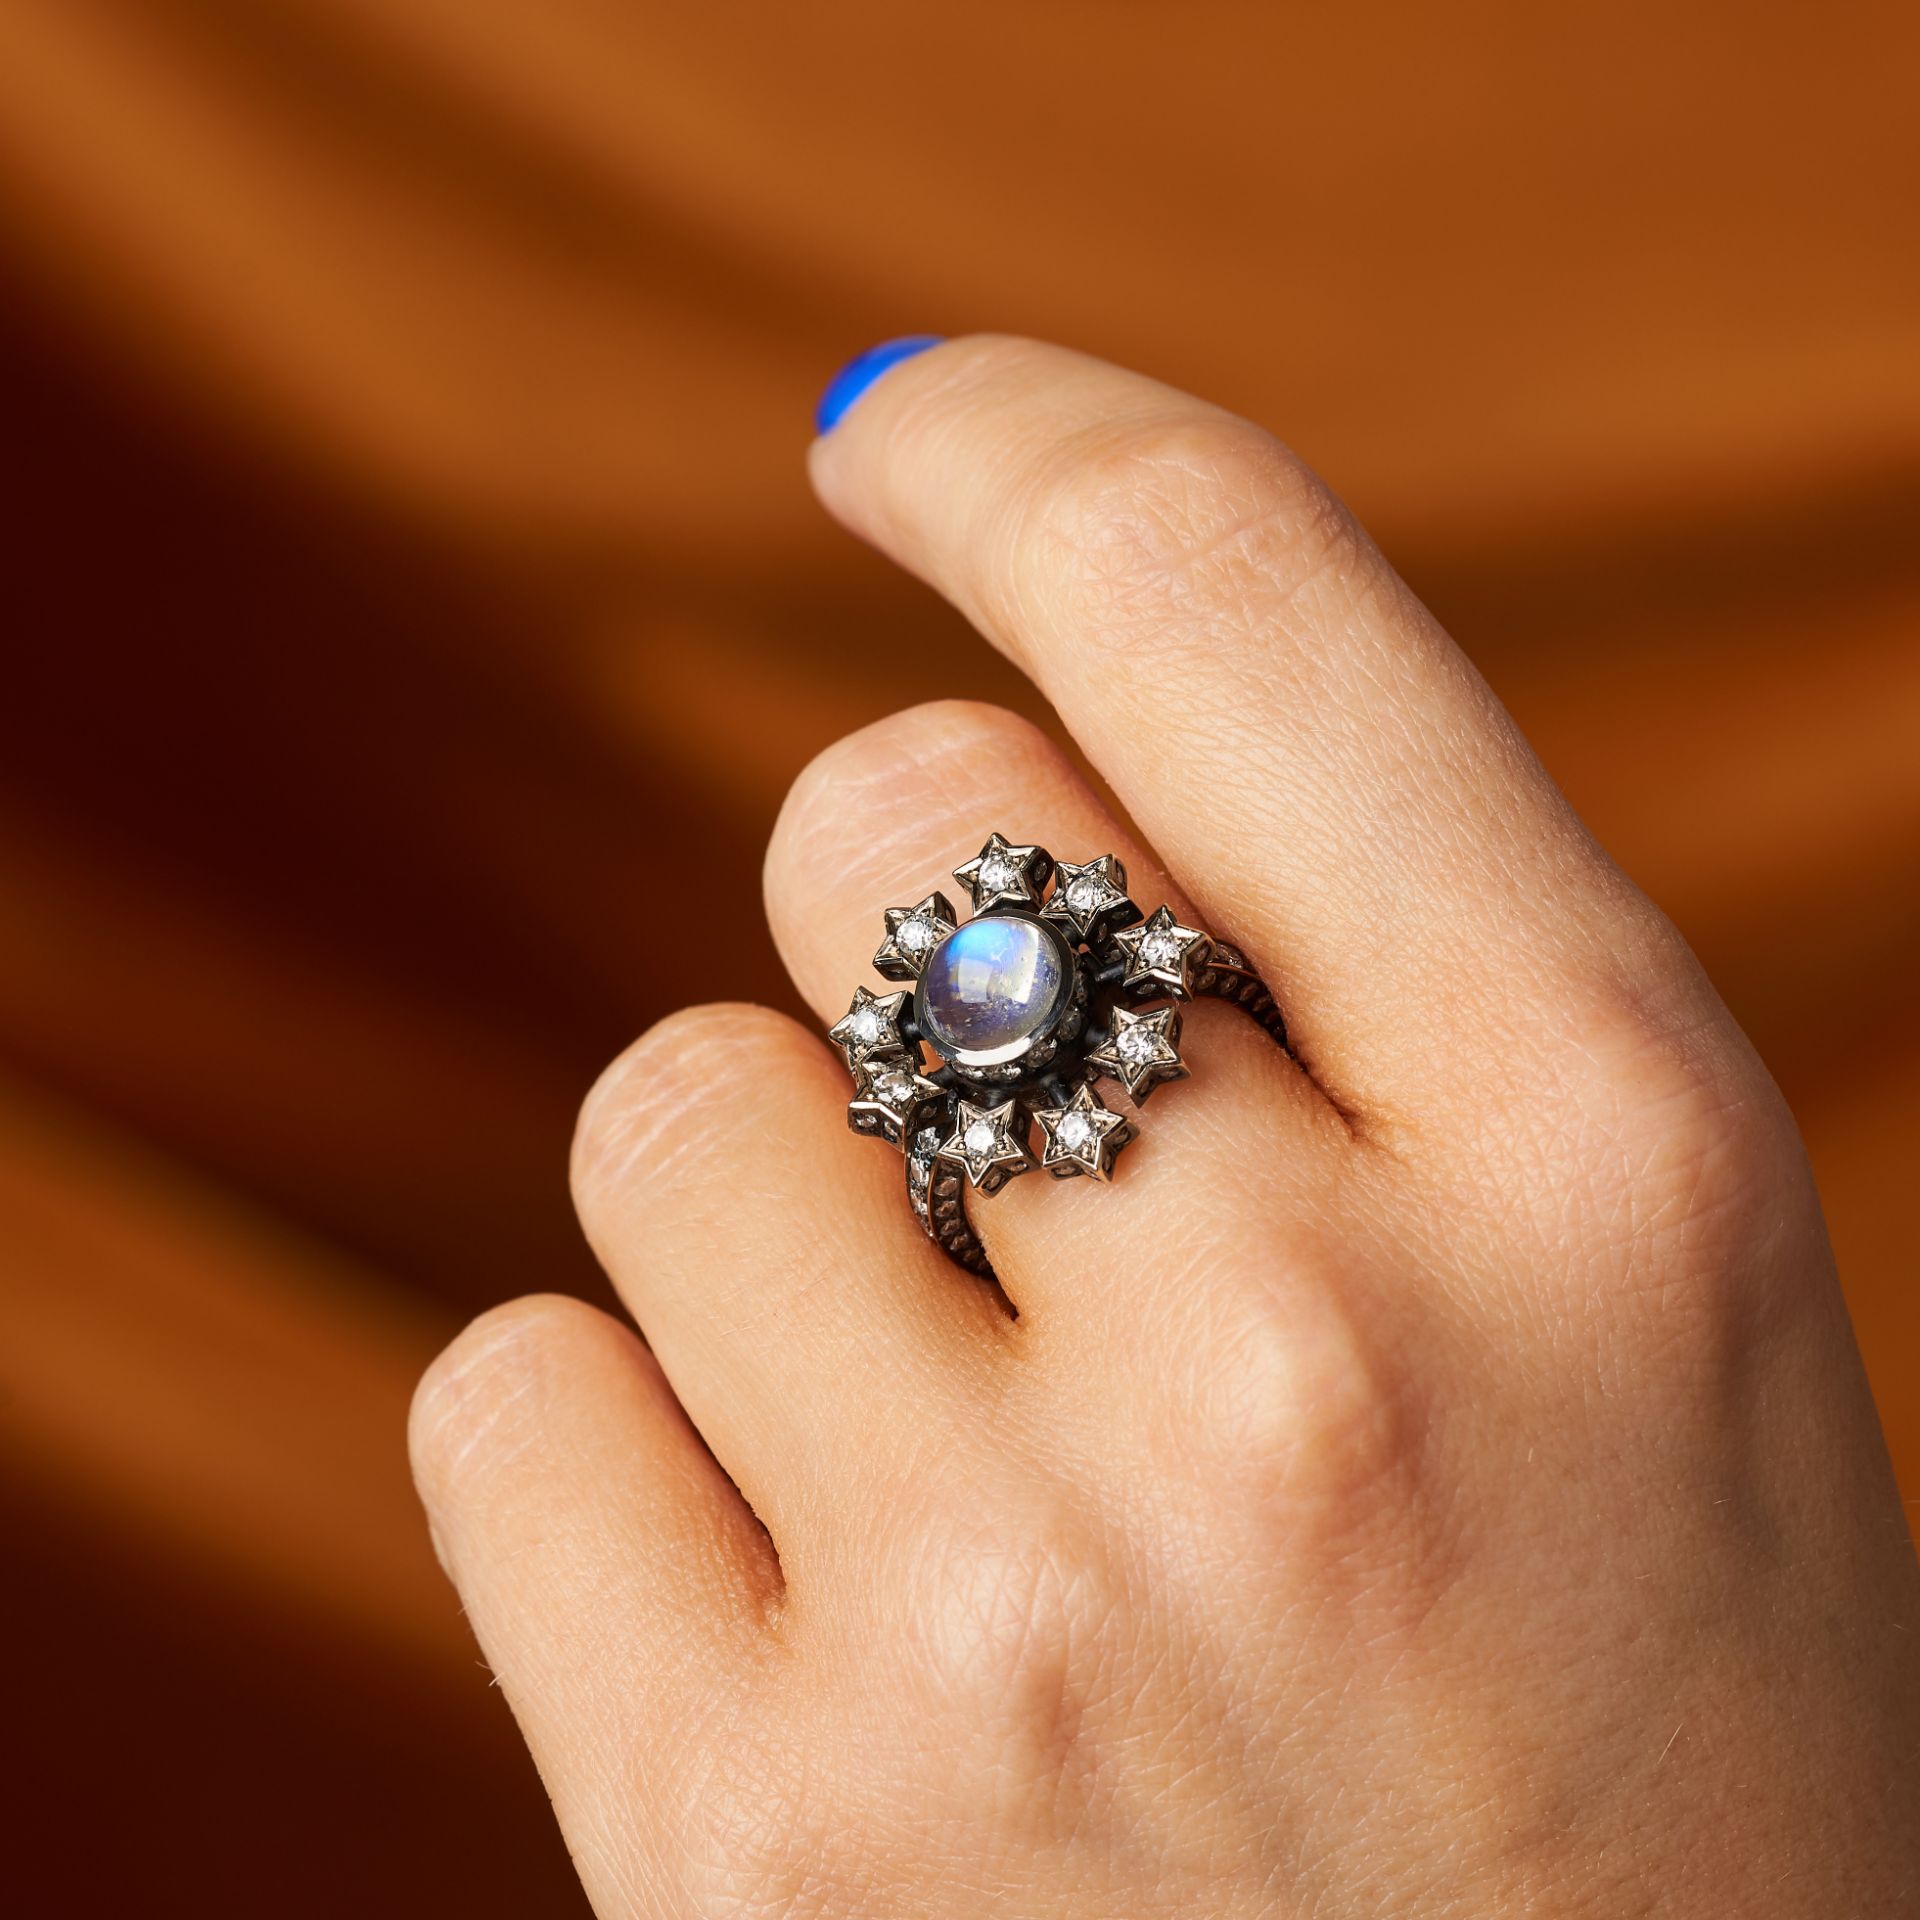 SOLANGE AZAGURY-PARTRIDGE, A MOONSTONE AND DIAMOND MOON AND STARS SPINNER RING in 18ct blackened ... - Image 3 of 3